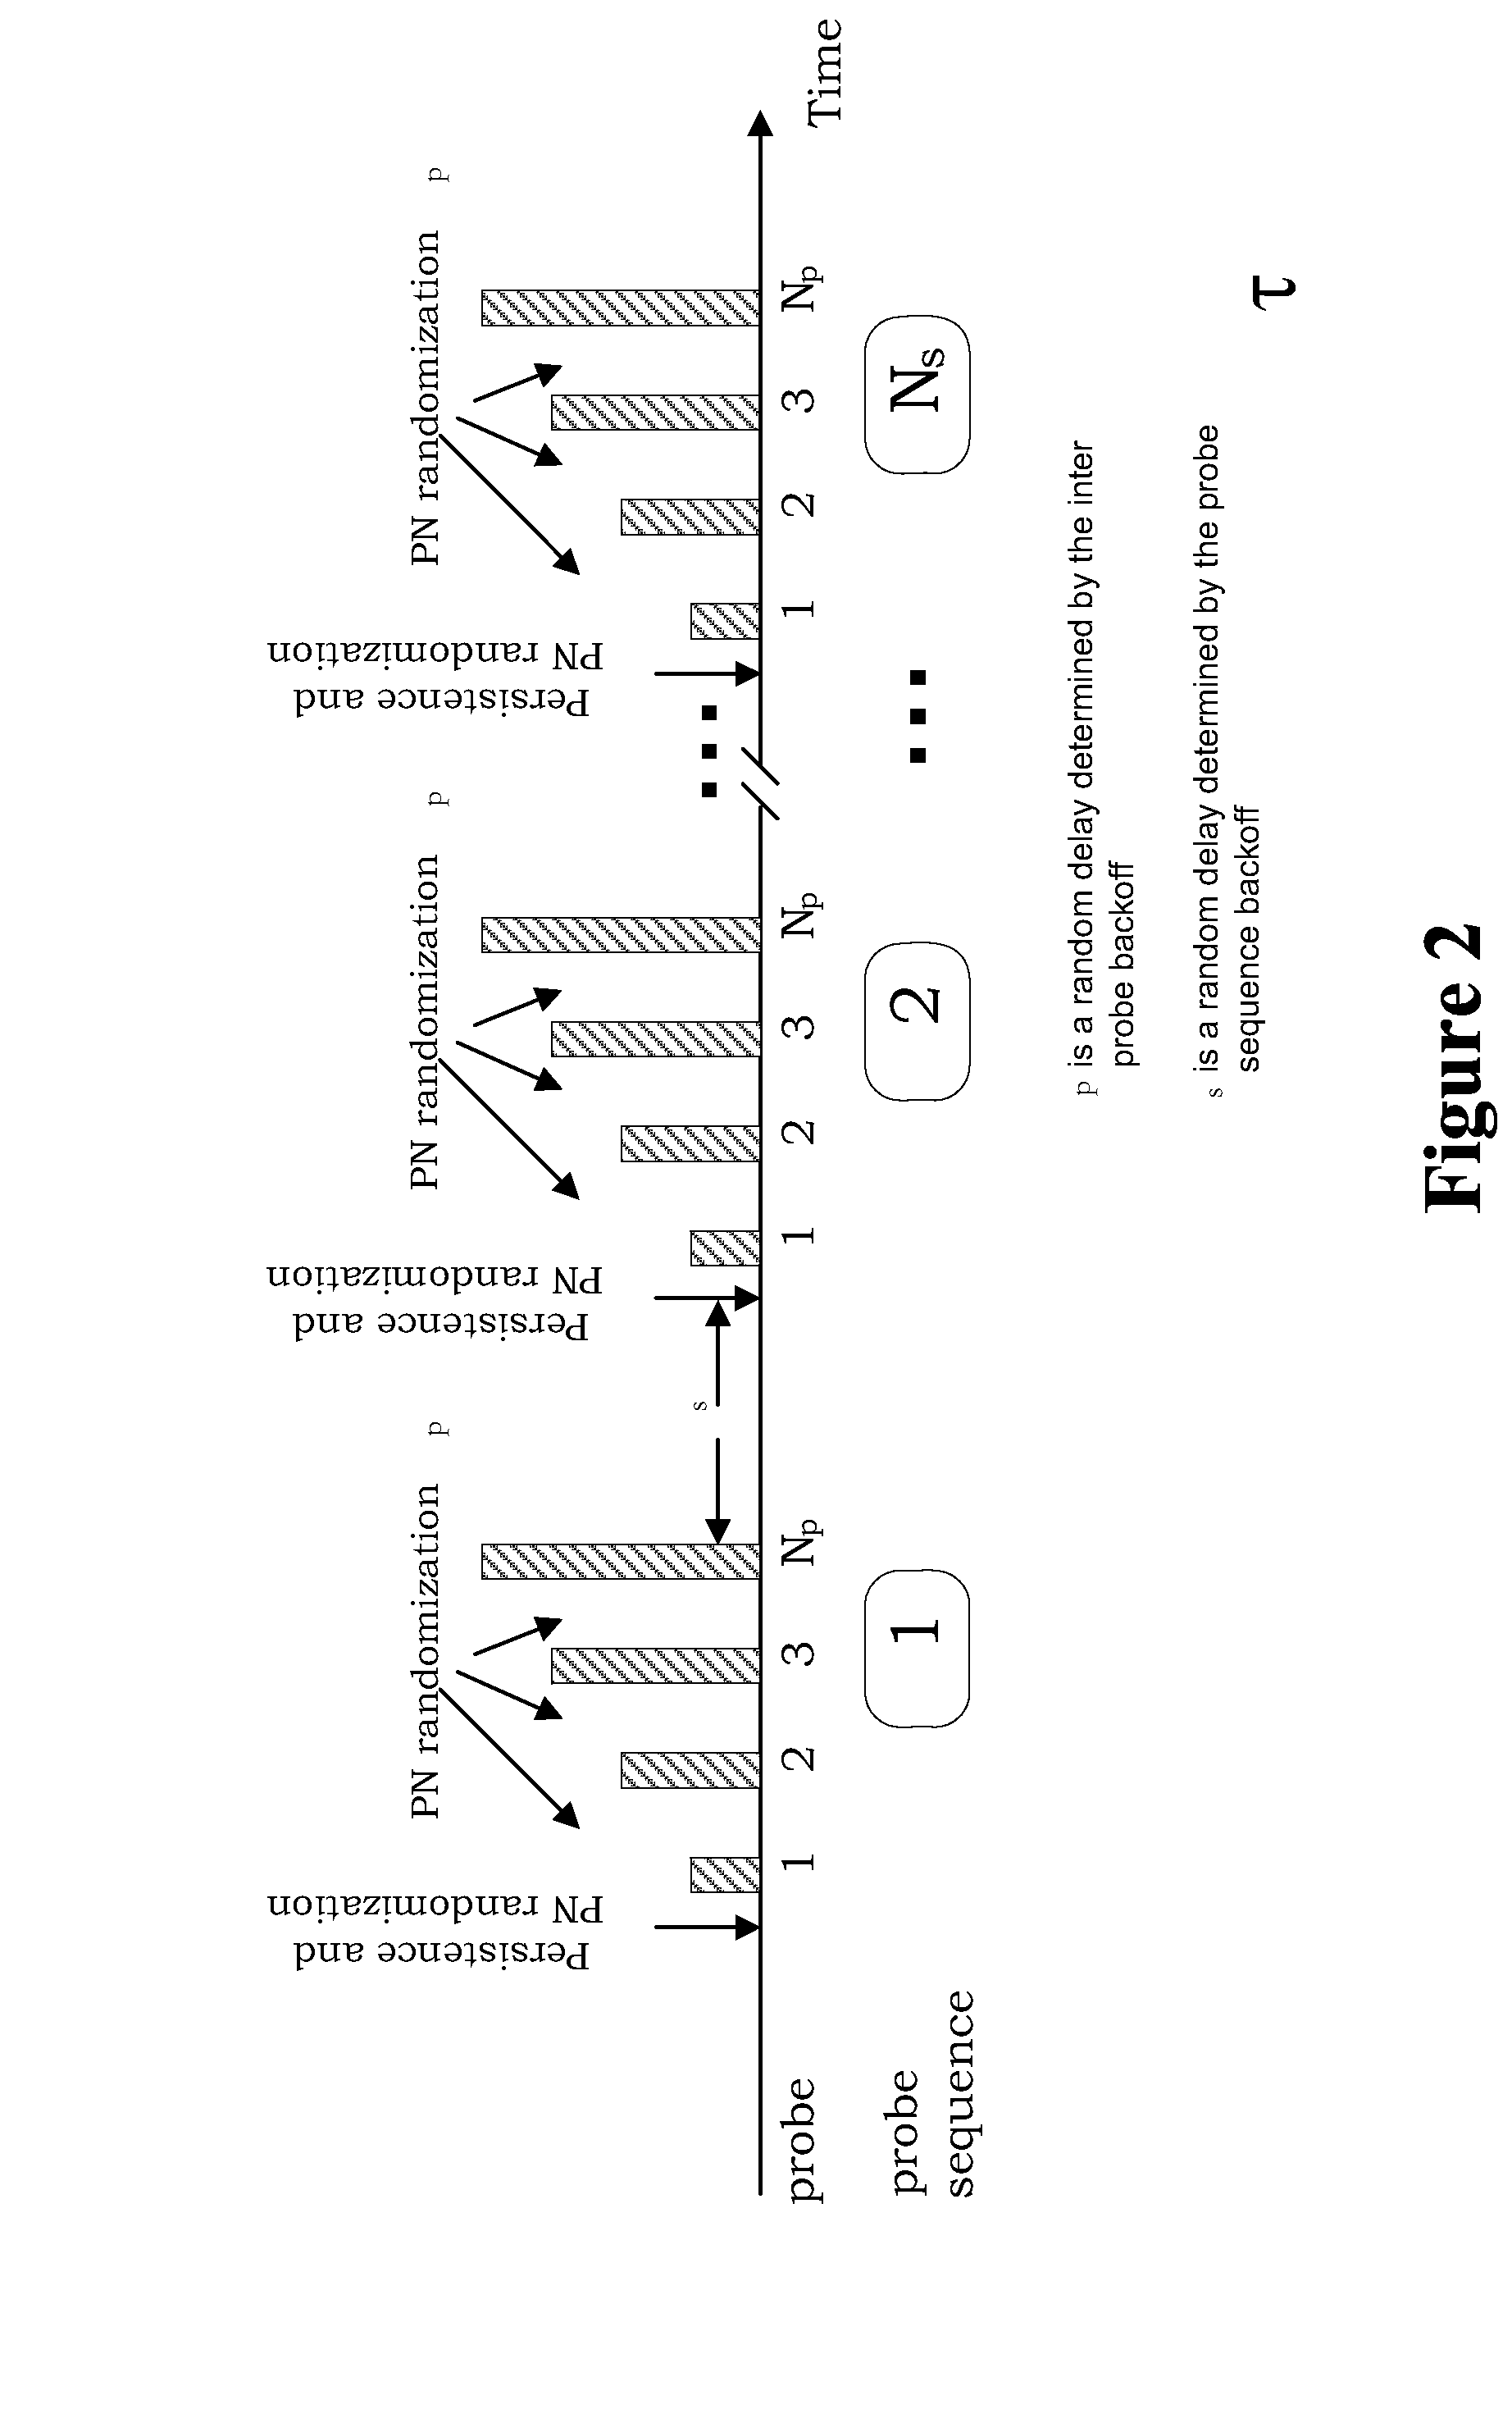 Method of determining characteristics of access classes in wireless communication systems